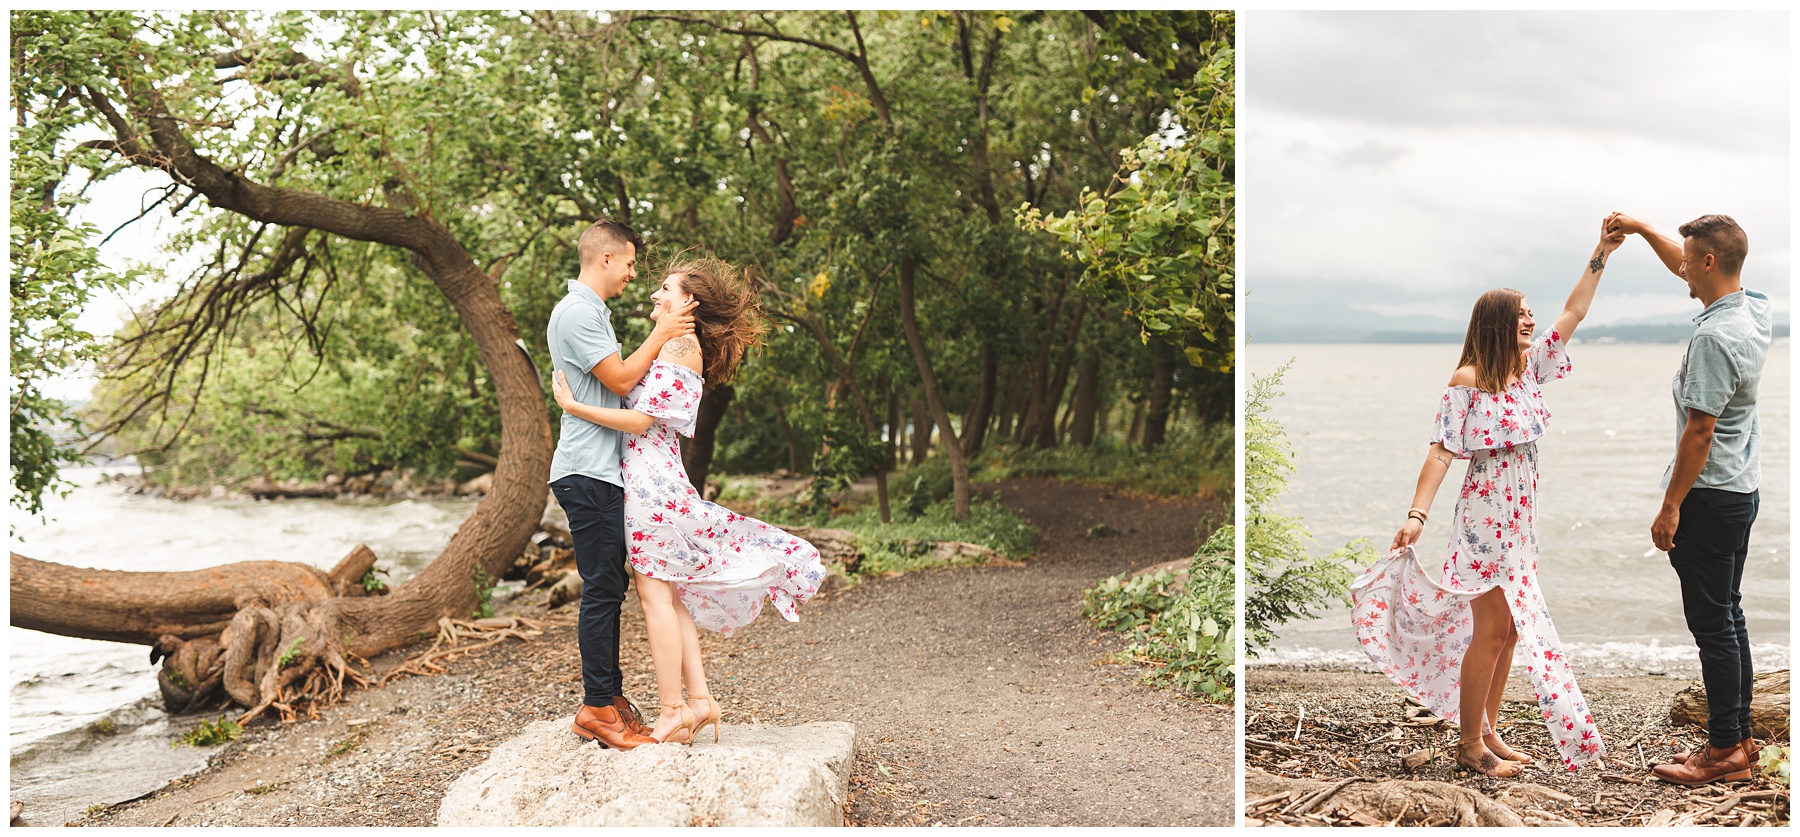 Courtney and Tyler's engagement photo shoot at Long Dock Park in Beacon NY